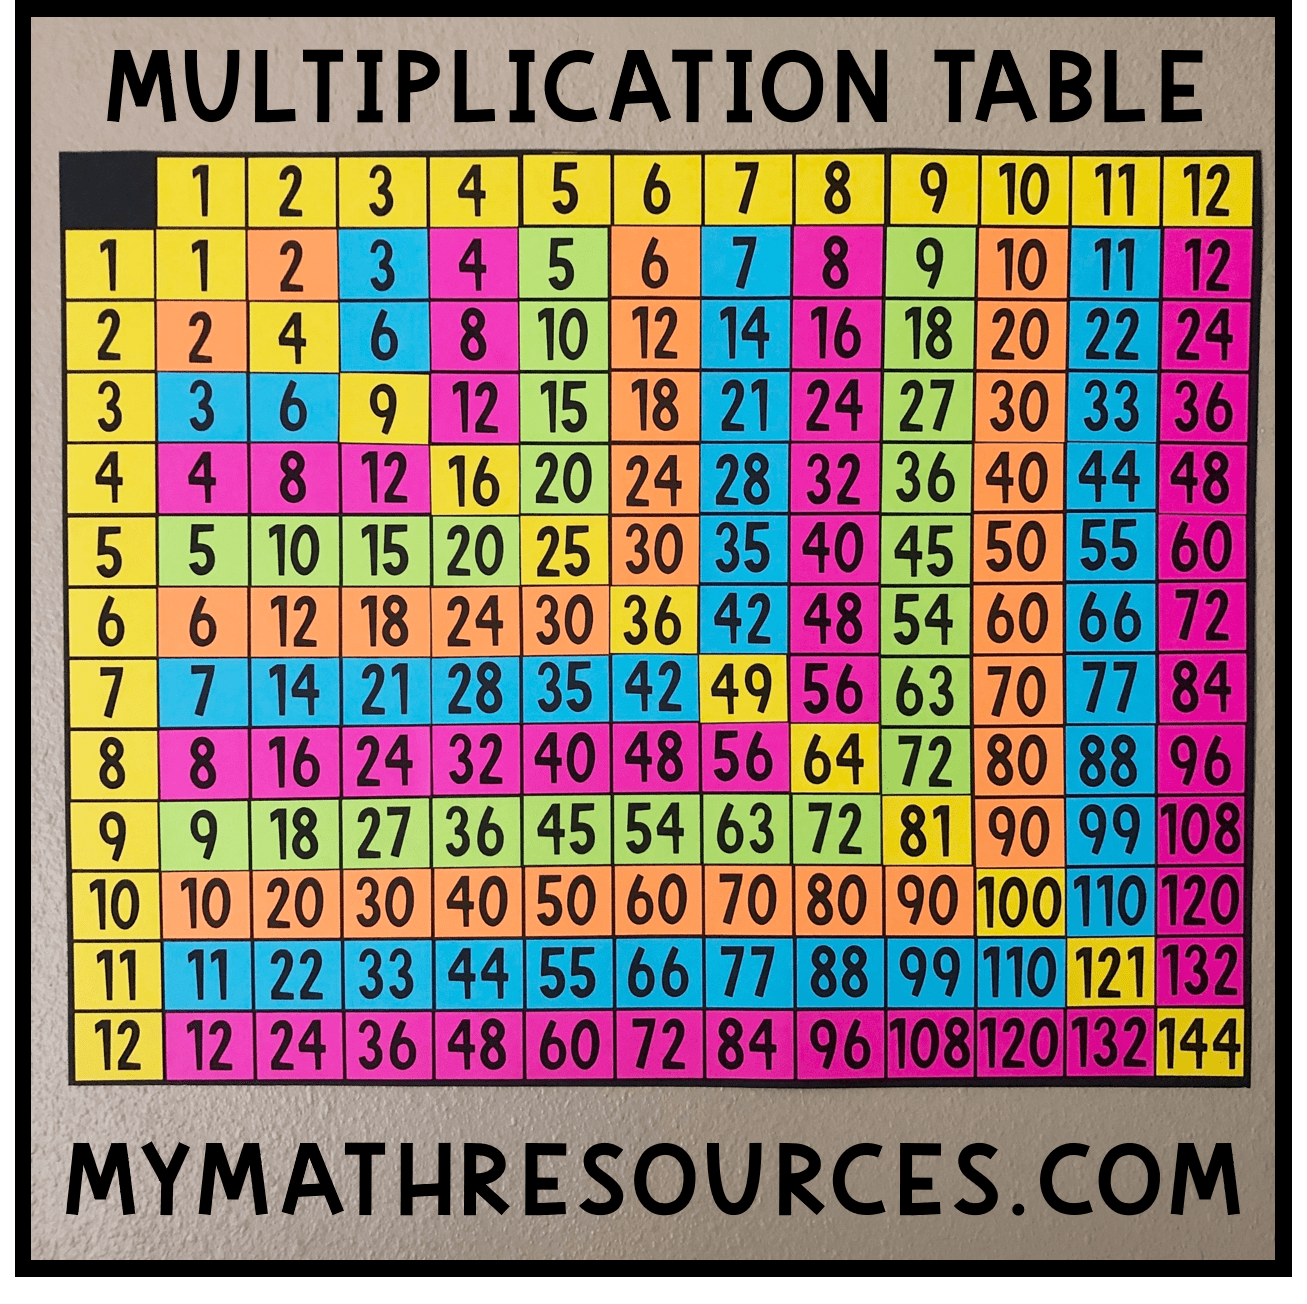 My Math Resources - Free Multiplication Table Poster | Math